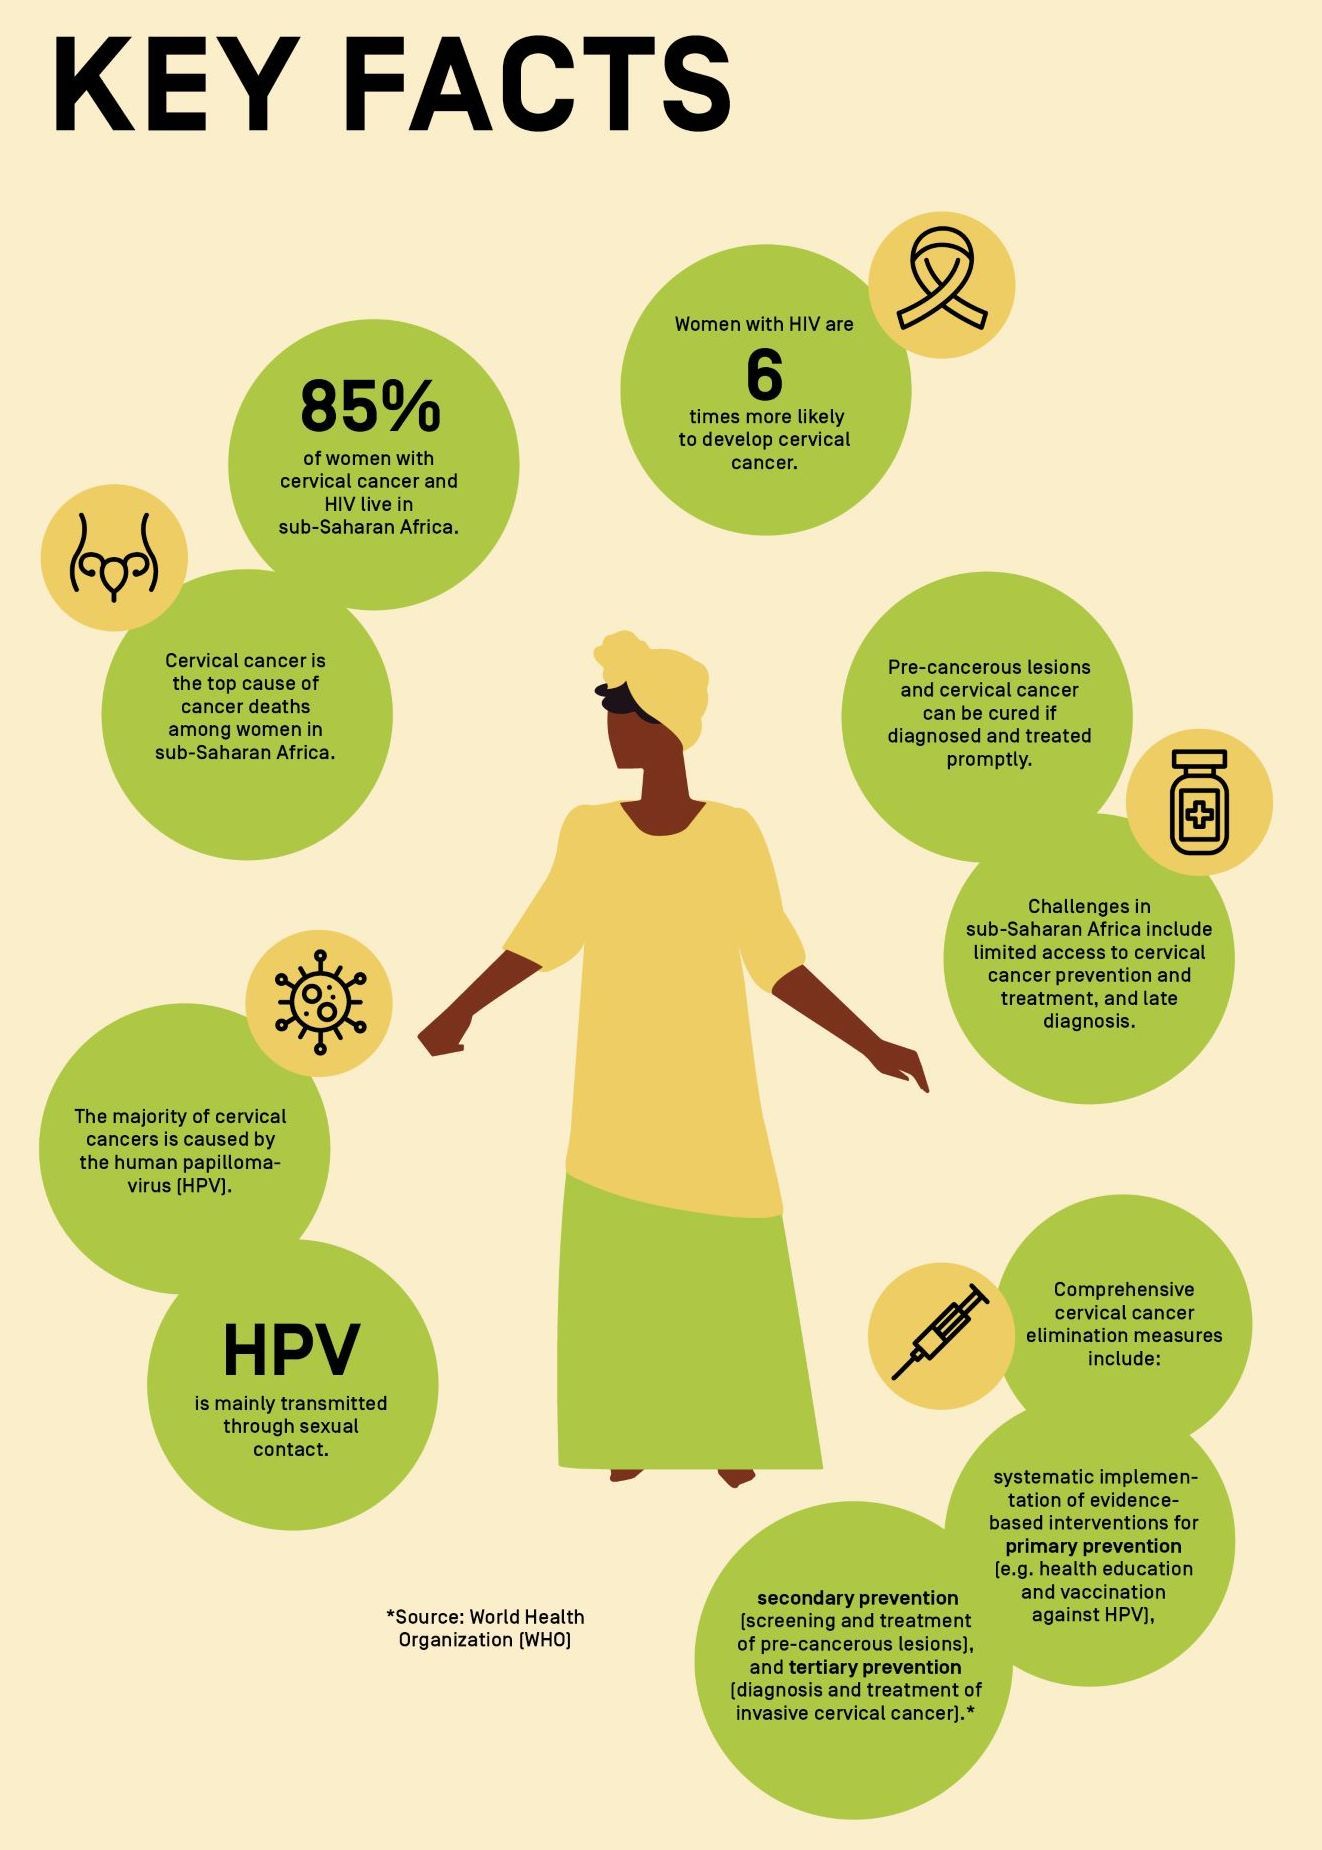 Read more in the brochure: Reducing Health Inequities in the Prevention of Cervical Cancer